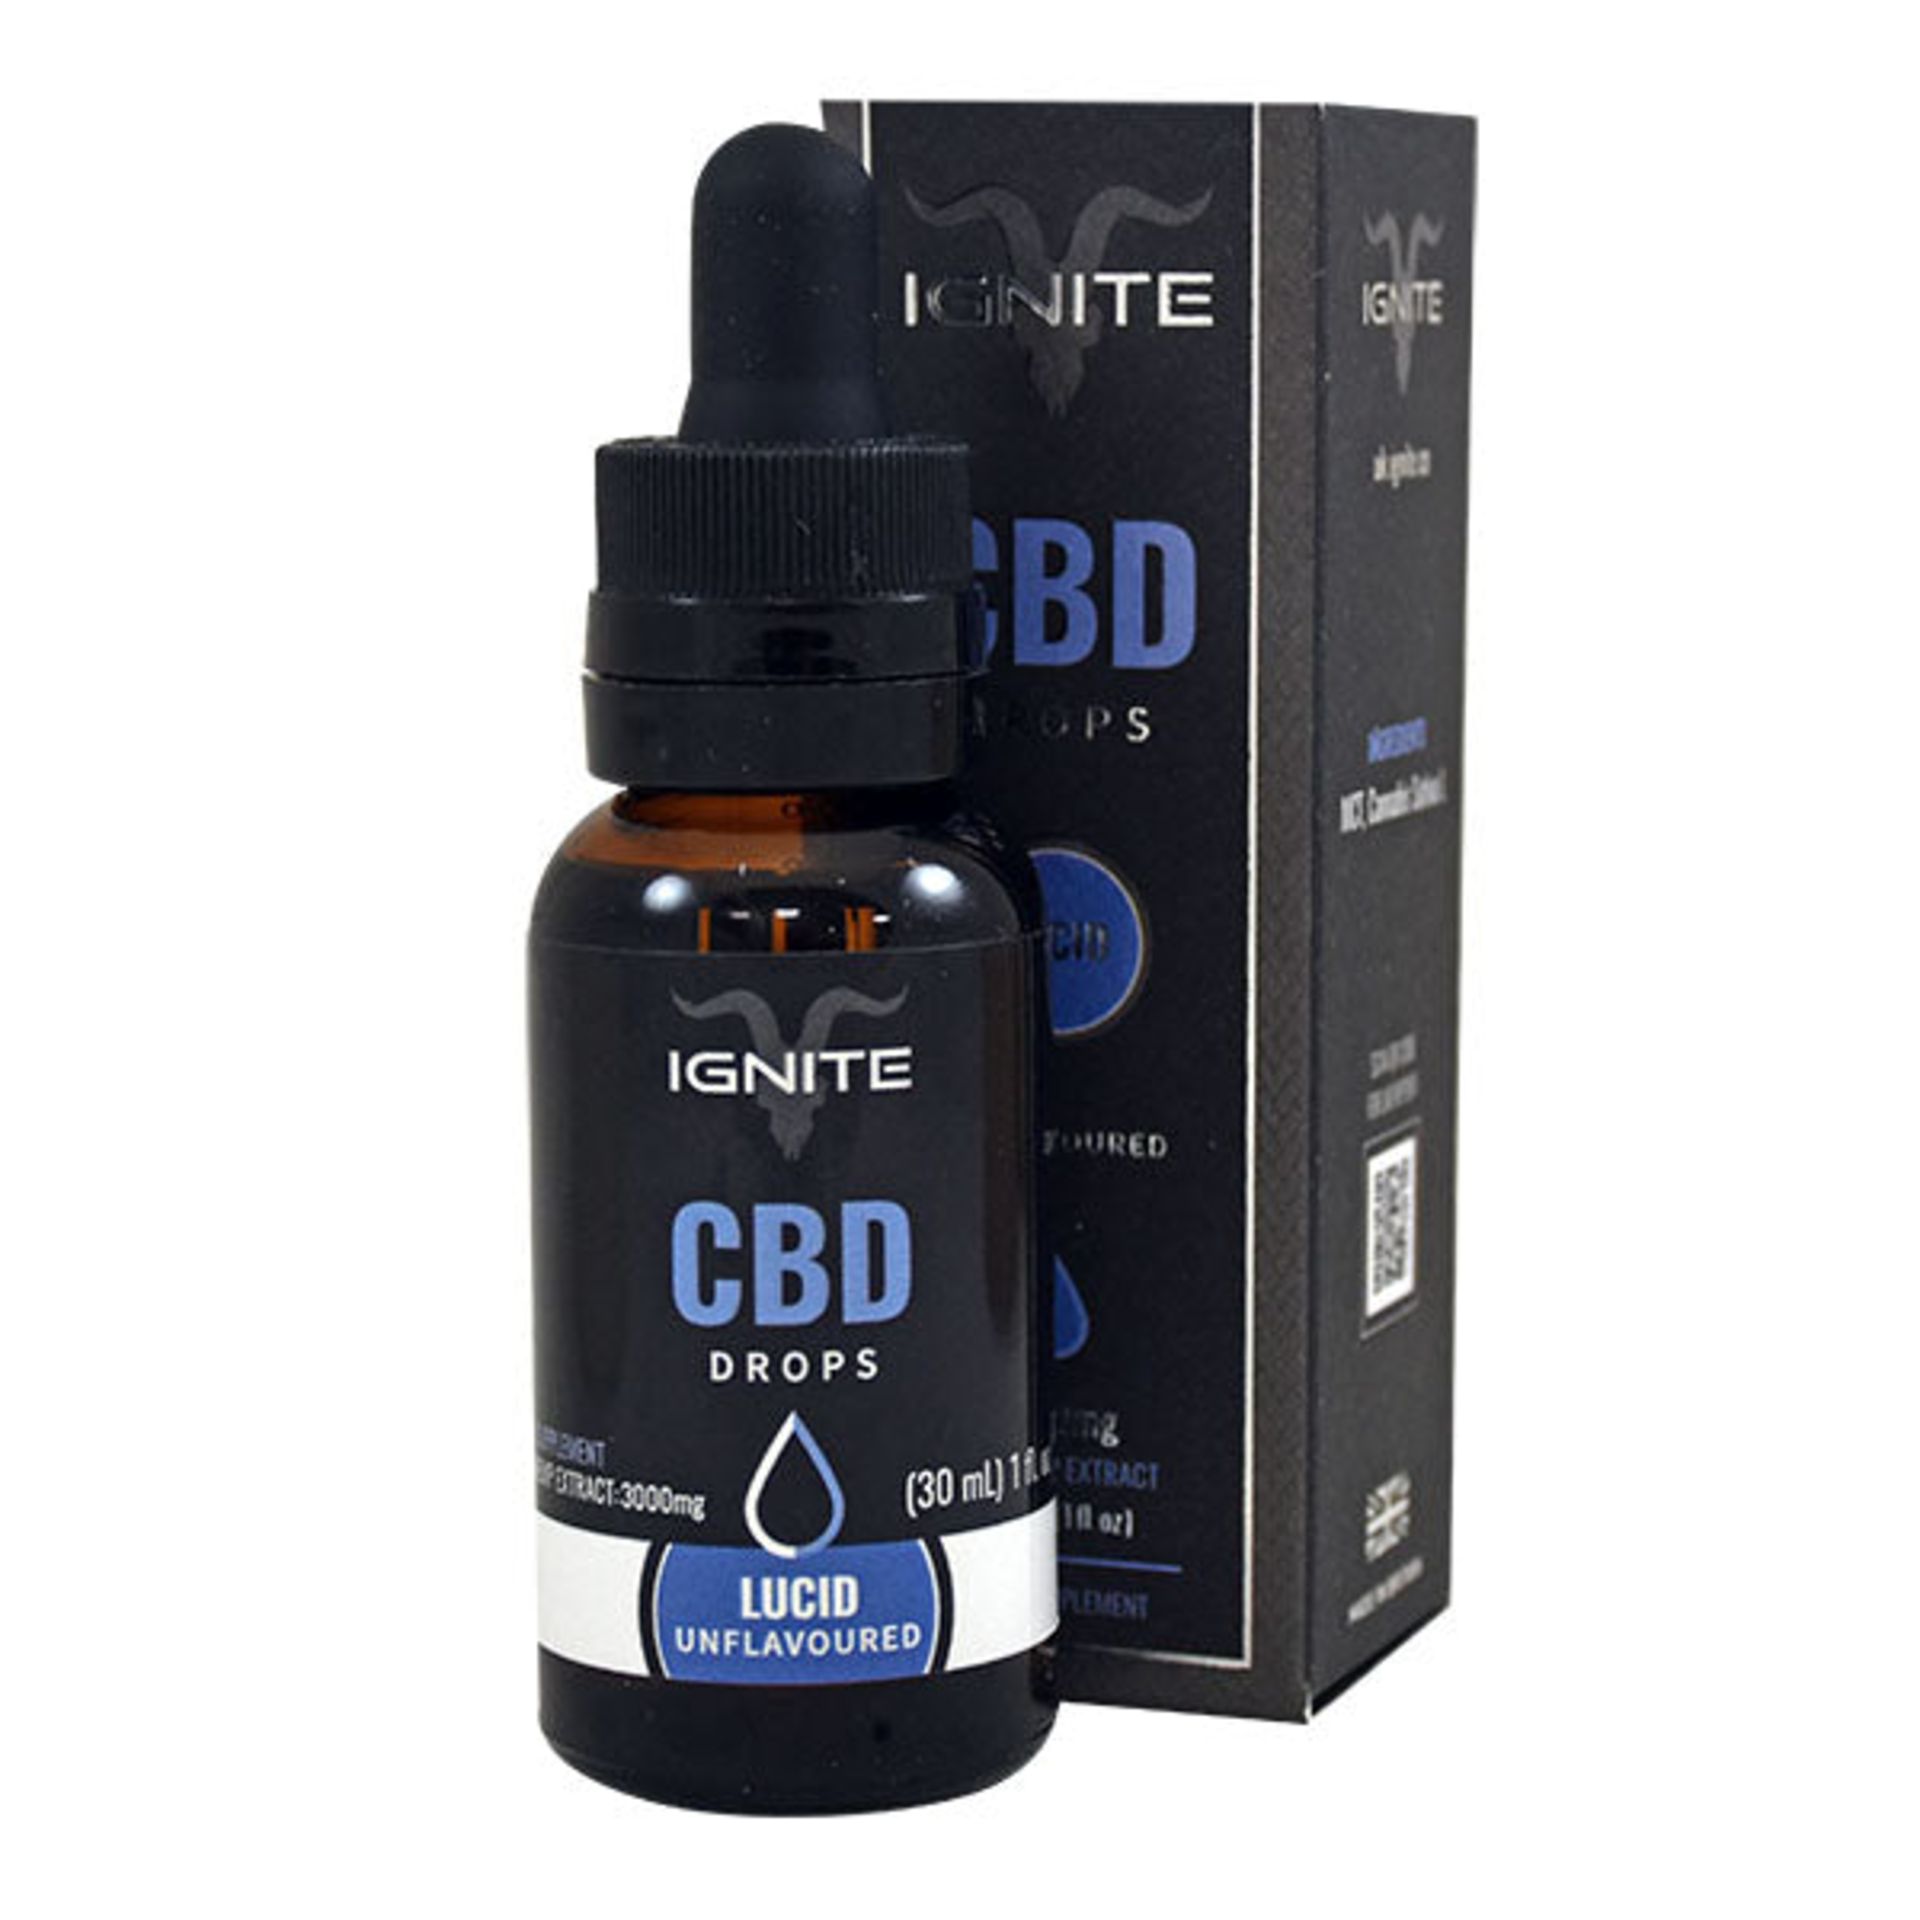 25 New Bottles of CBD Oral Drops - Unflavoured (Lucid) 3000mg - RRP £50+ per bottle - Image 2 of 4